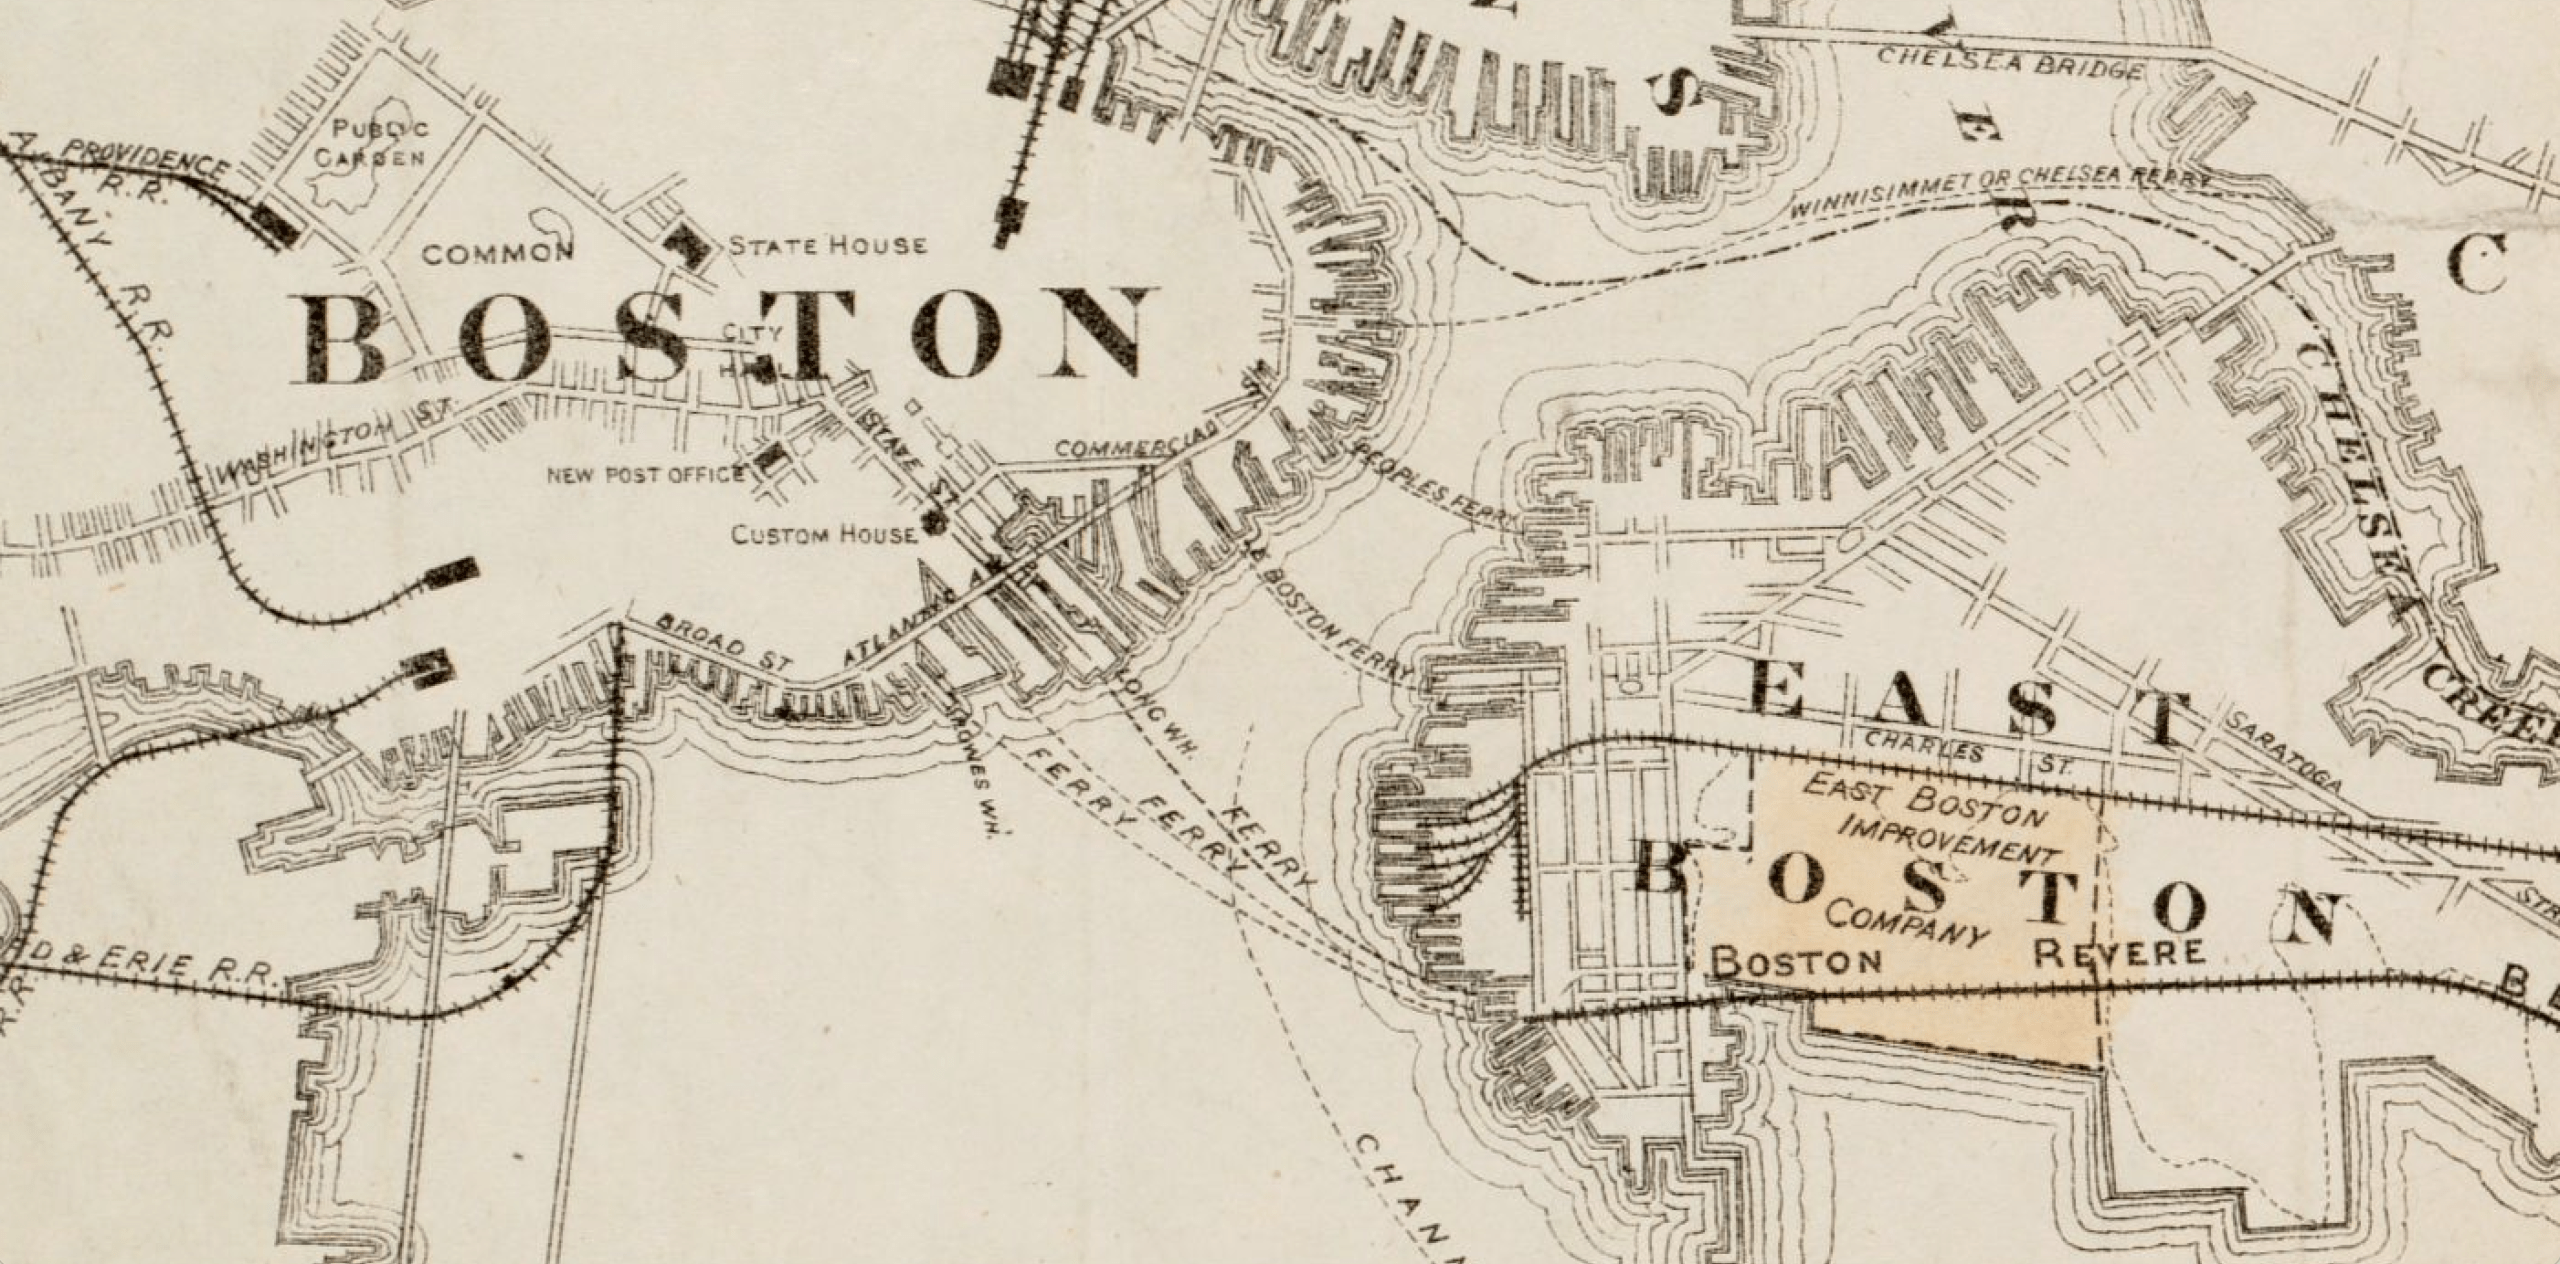 Ferry lines are indicated on the &quot;Plan of estate of the Boston Land Co. and surroundings&quot; map, drawn believed to have been drawn between 1880 and 1889. (Courtesy Boston Public Library, Norman B. Leventhal Map Center)